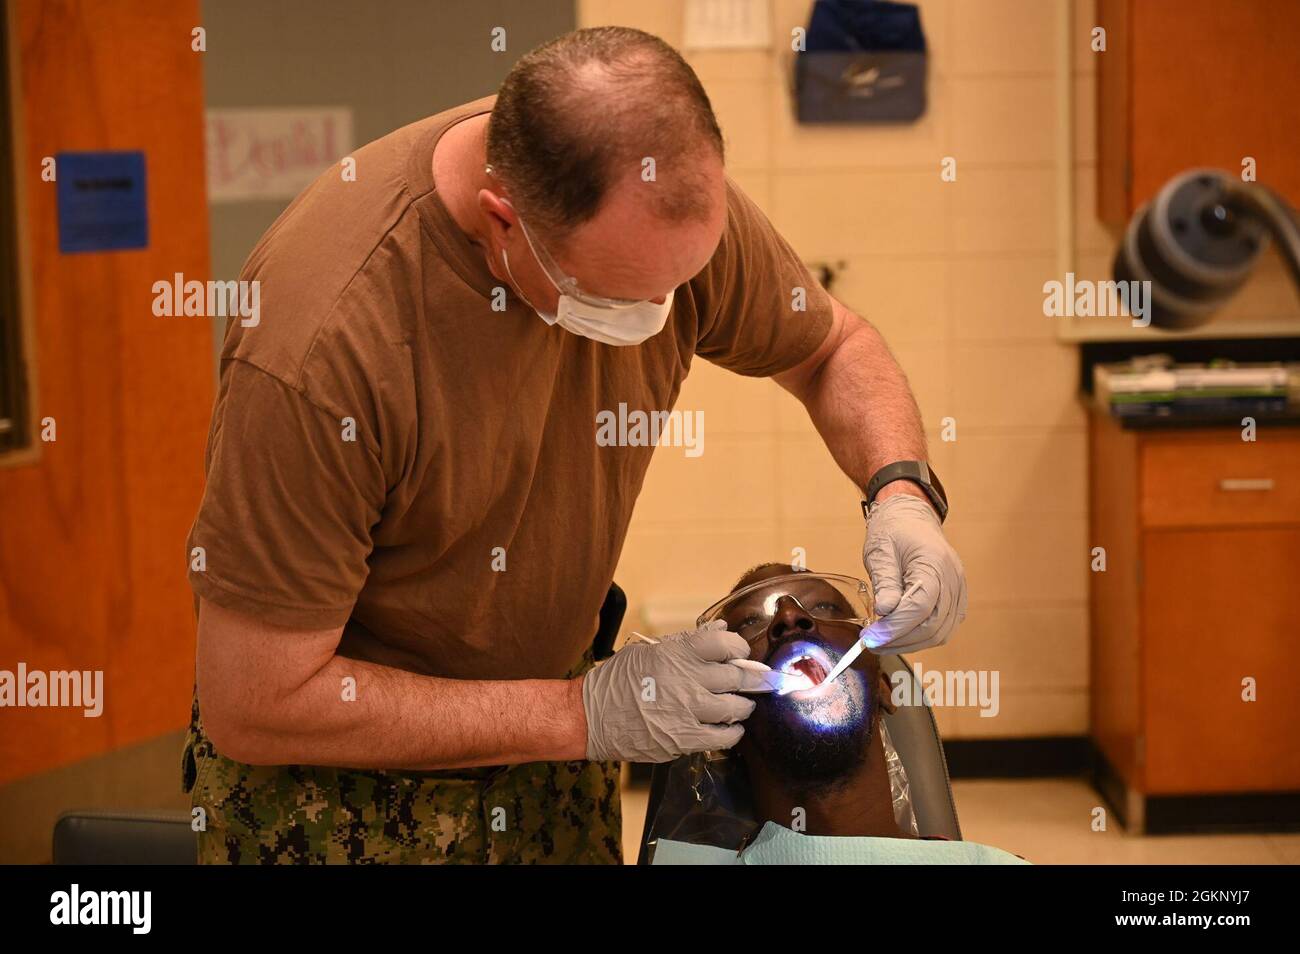 U.S. Air Force Lt. Col. Allen Barth, a dentist at the Innovative Readiness Training medical site in Waynesboro, Georgia, examines a patients mouth, June 9, 2021. The joint force exercise provides no-cost medical care to local residents. The training, with elements from the Army, Navy, Air Force and Marine Corps reserves, and the Air National Guard, runs from June 10-17, 2021, at four locations in East Central Georgia. Stock Photo